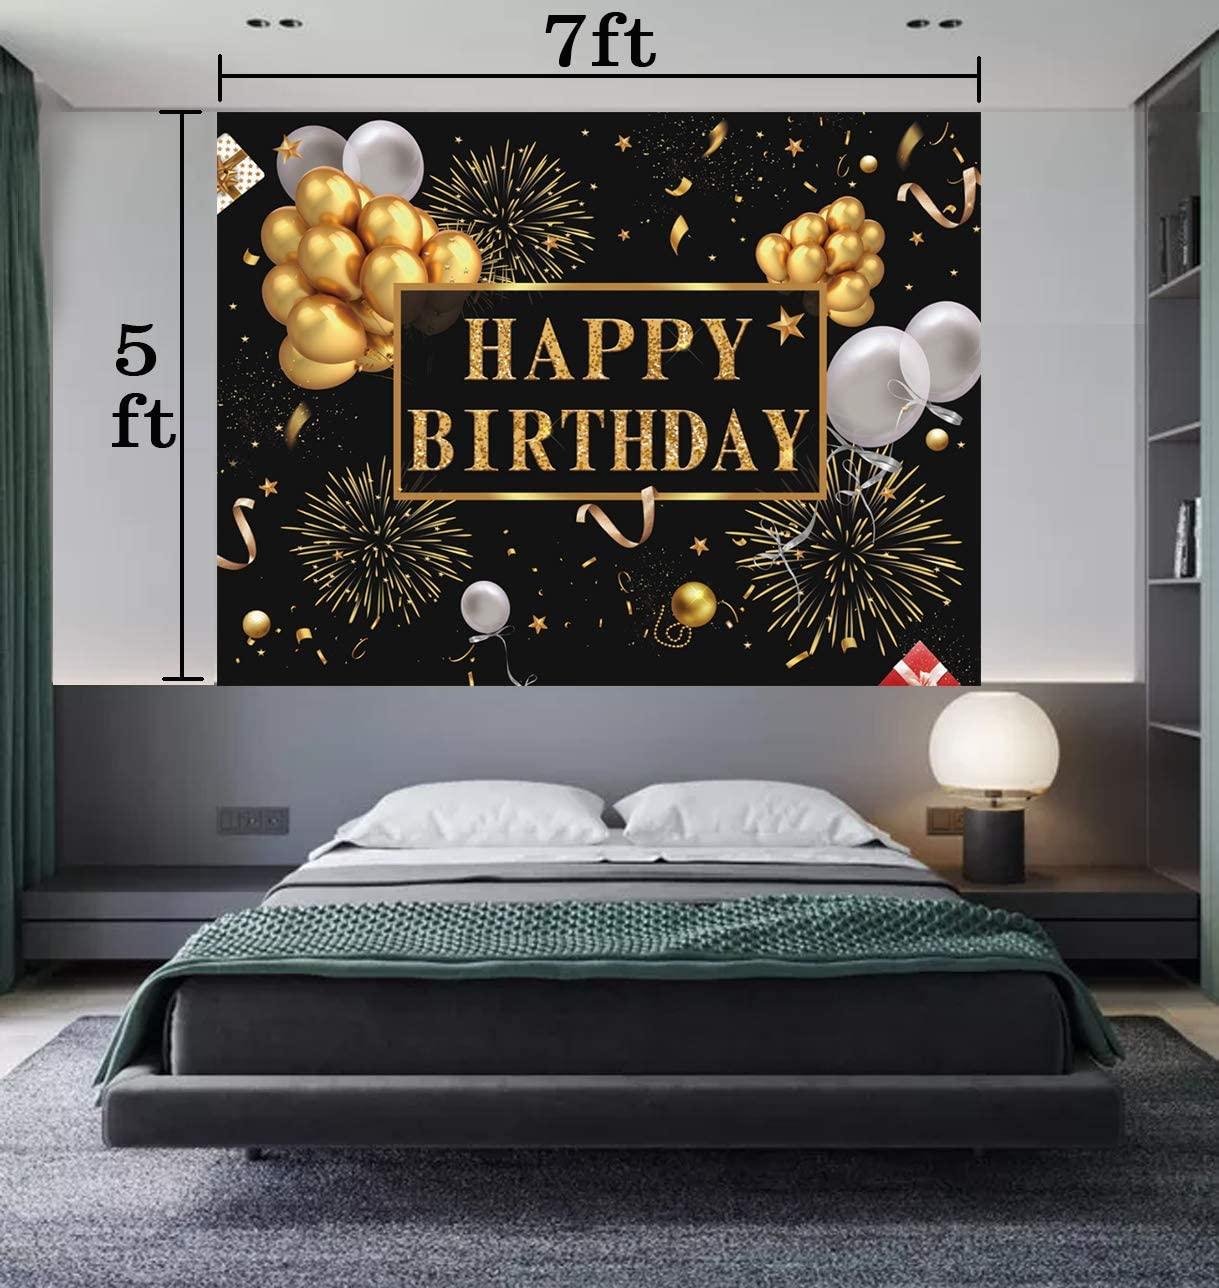 Happy Birthday Backdrop Banner, Birthday Party Decor,Black Gold Poster Photo Booth Backdrop Background - Lasercutwraps Shop